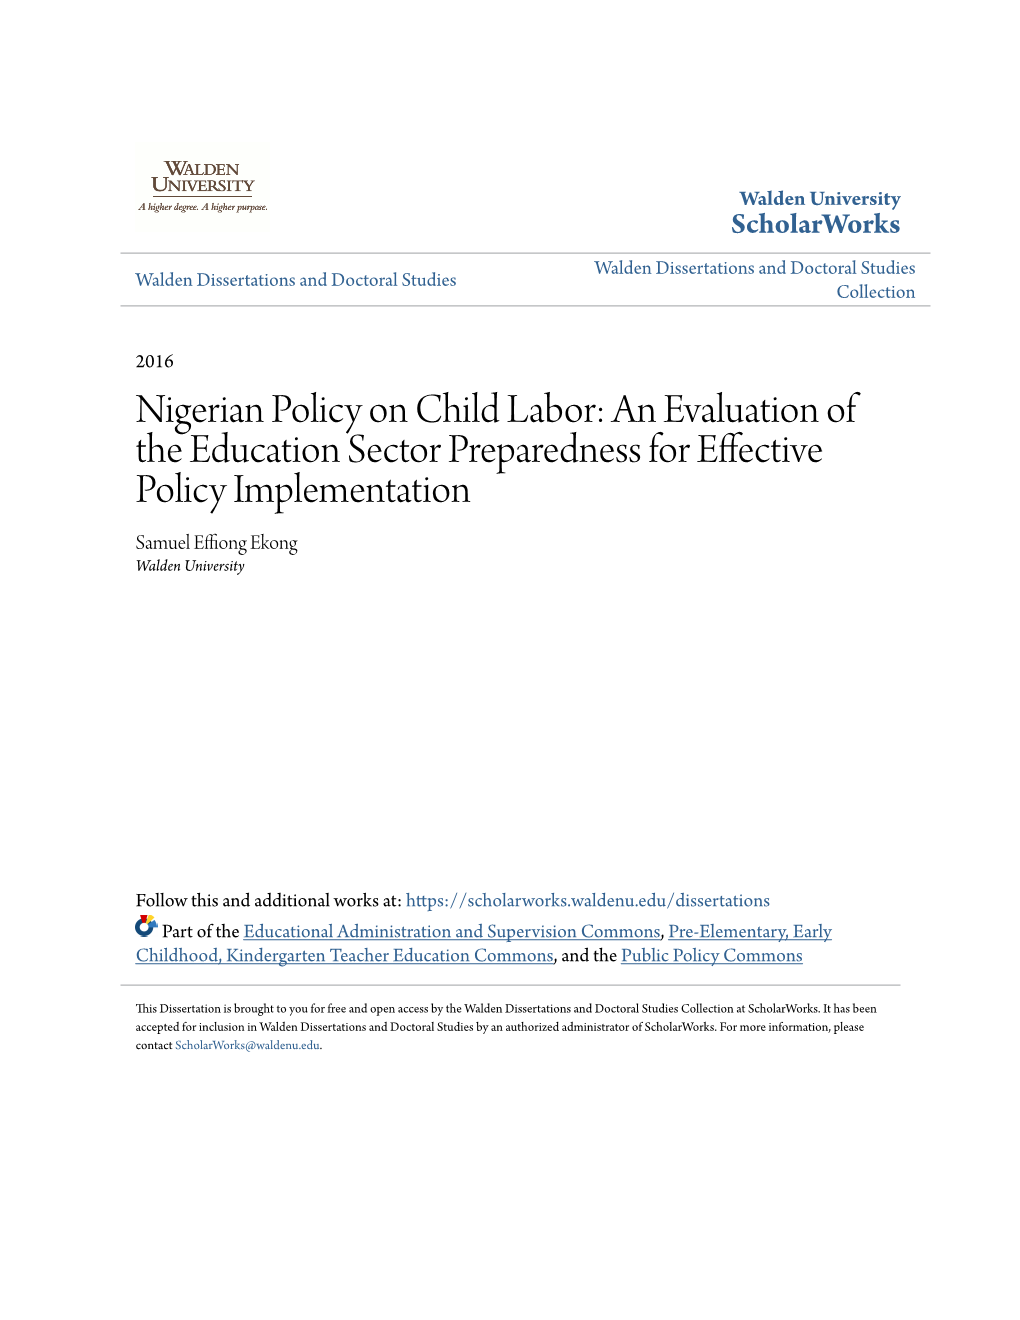 Nigerian Policy on Child Labor: an Evaluation of the Education Sector Preparedness for Effective Policy Implementation Samuel Effiong Ekong Walden University